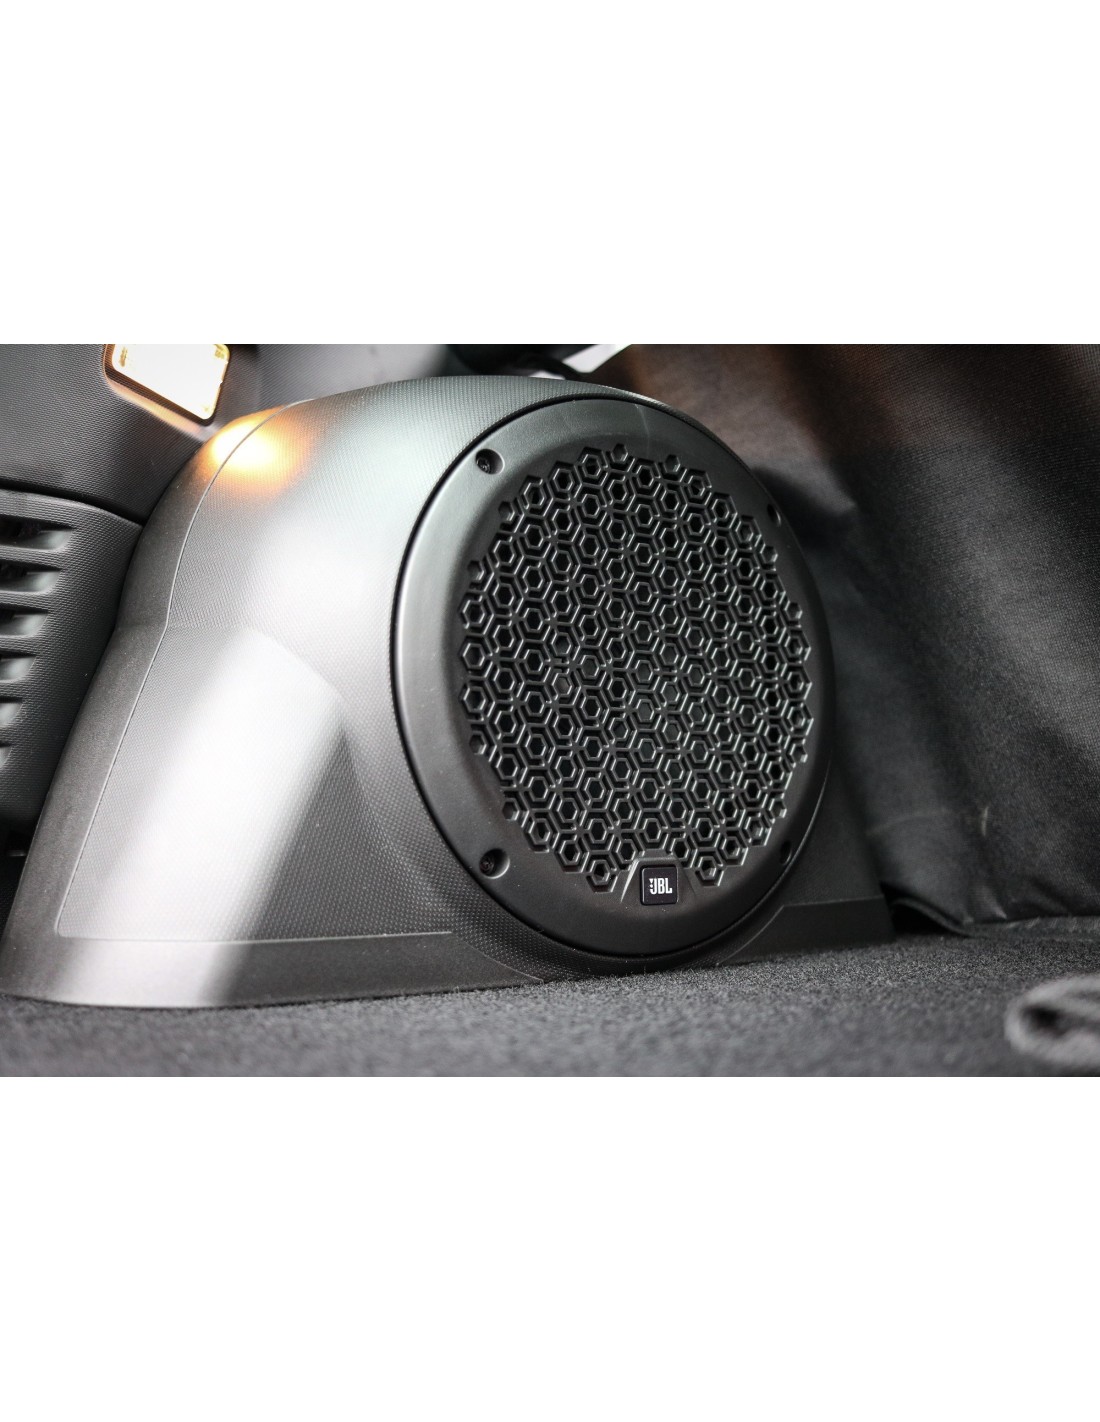 Smart 453 Forum, I got the JBL system in my fortwo